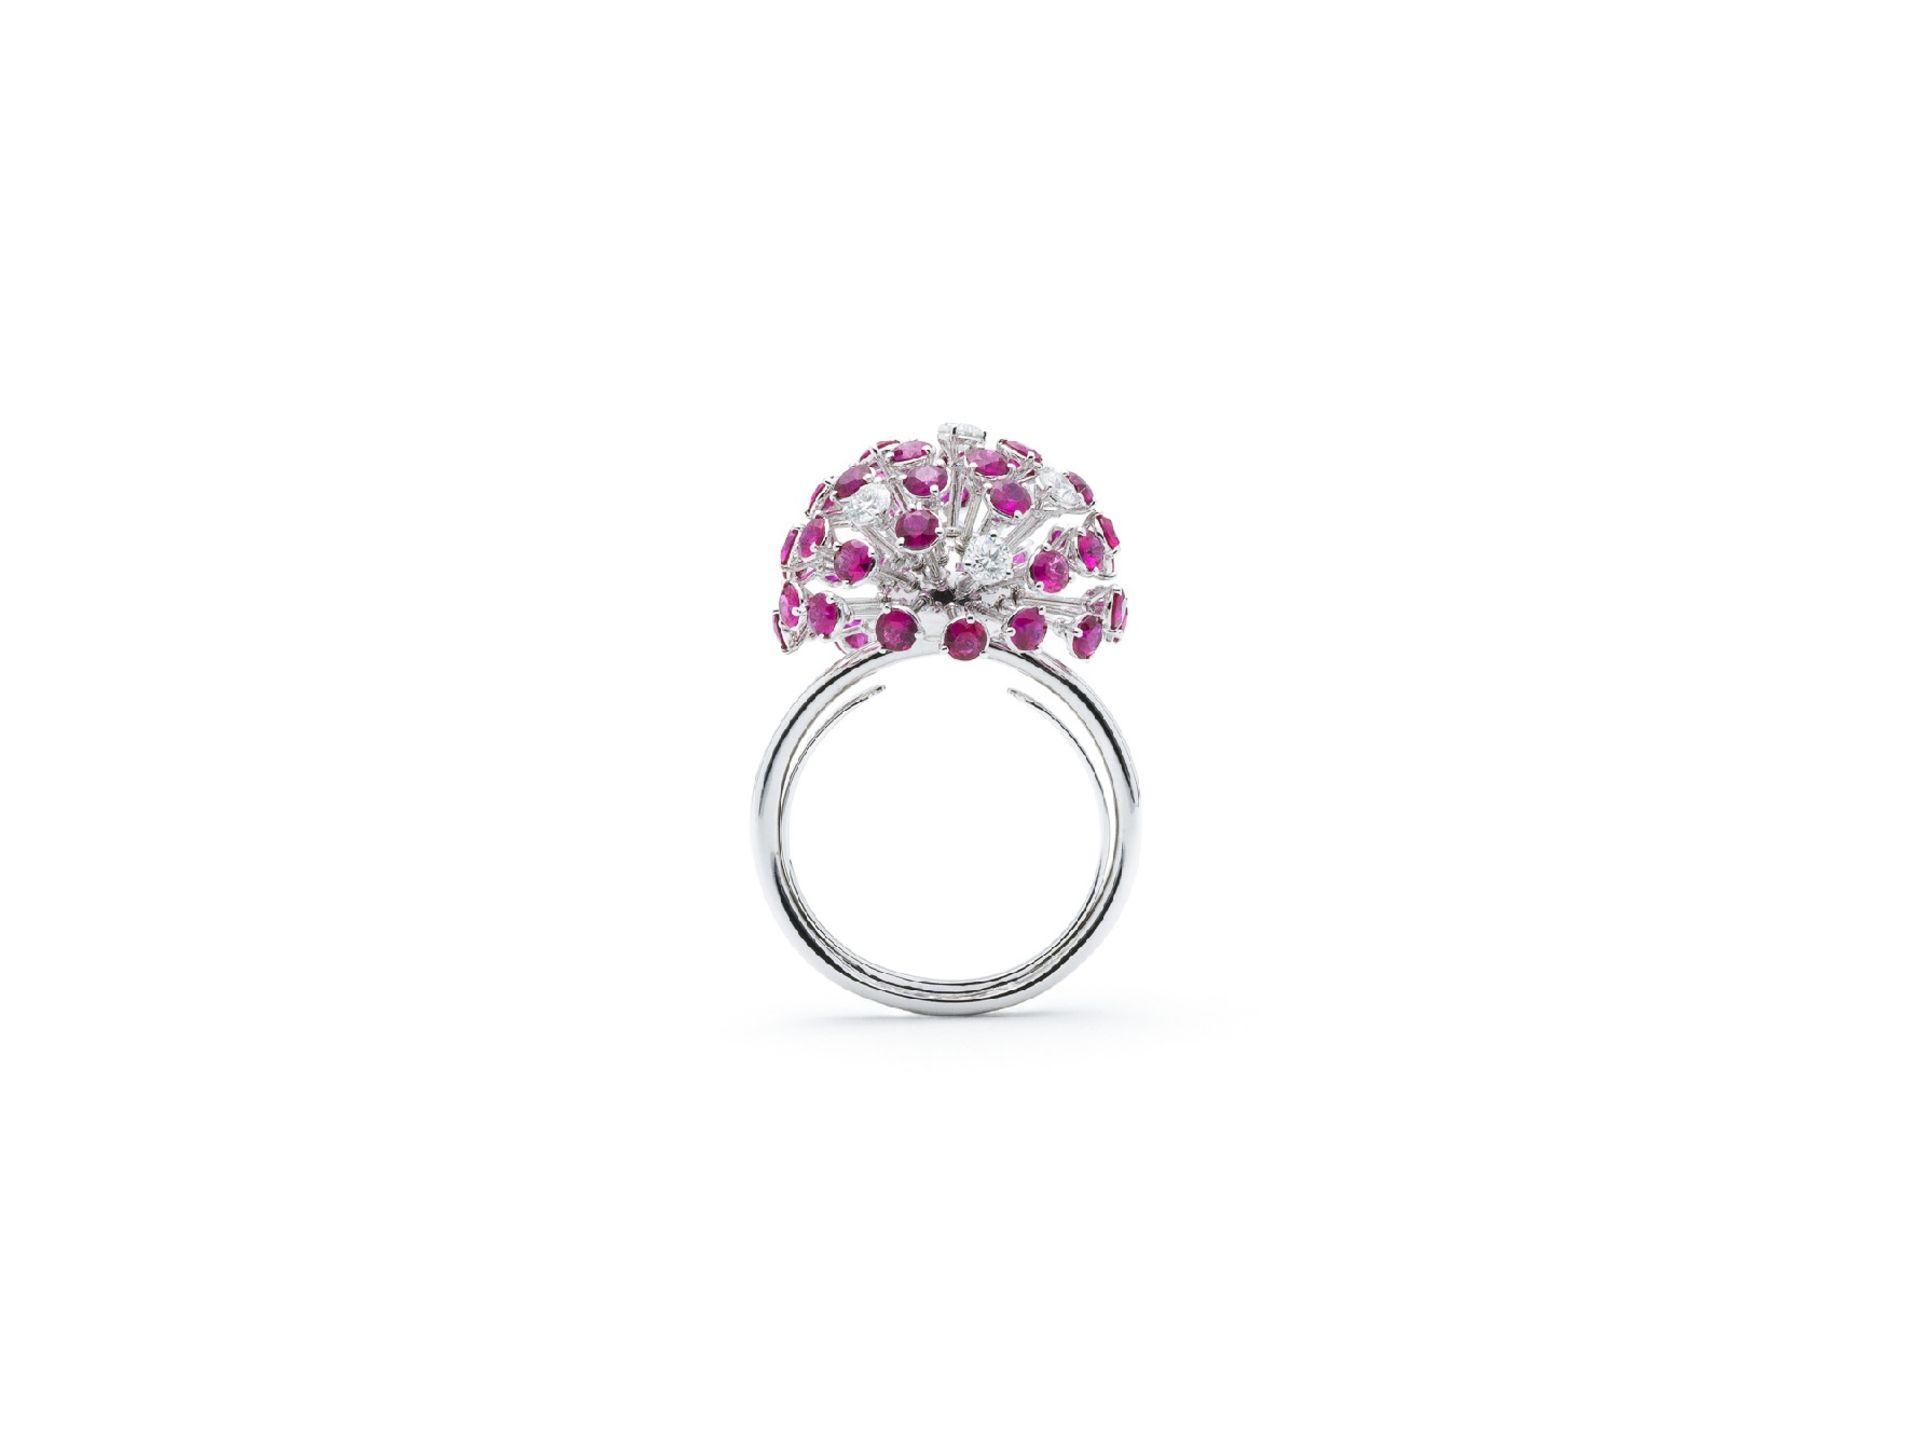 Ring with brilliant diamonds and rubies